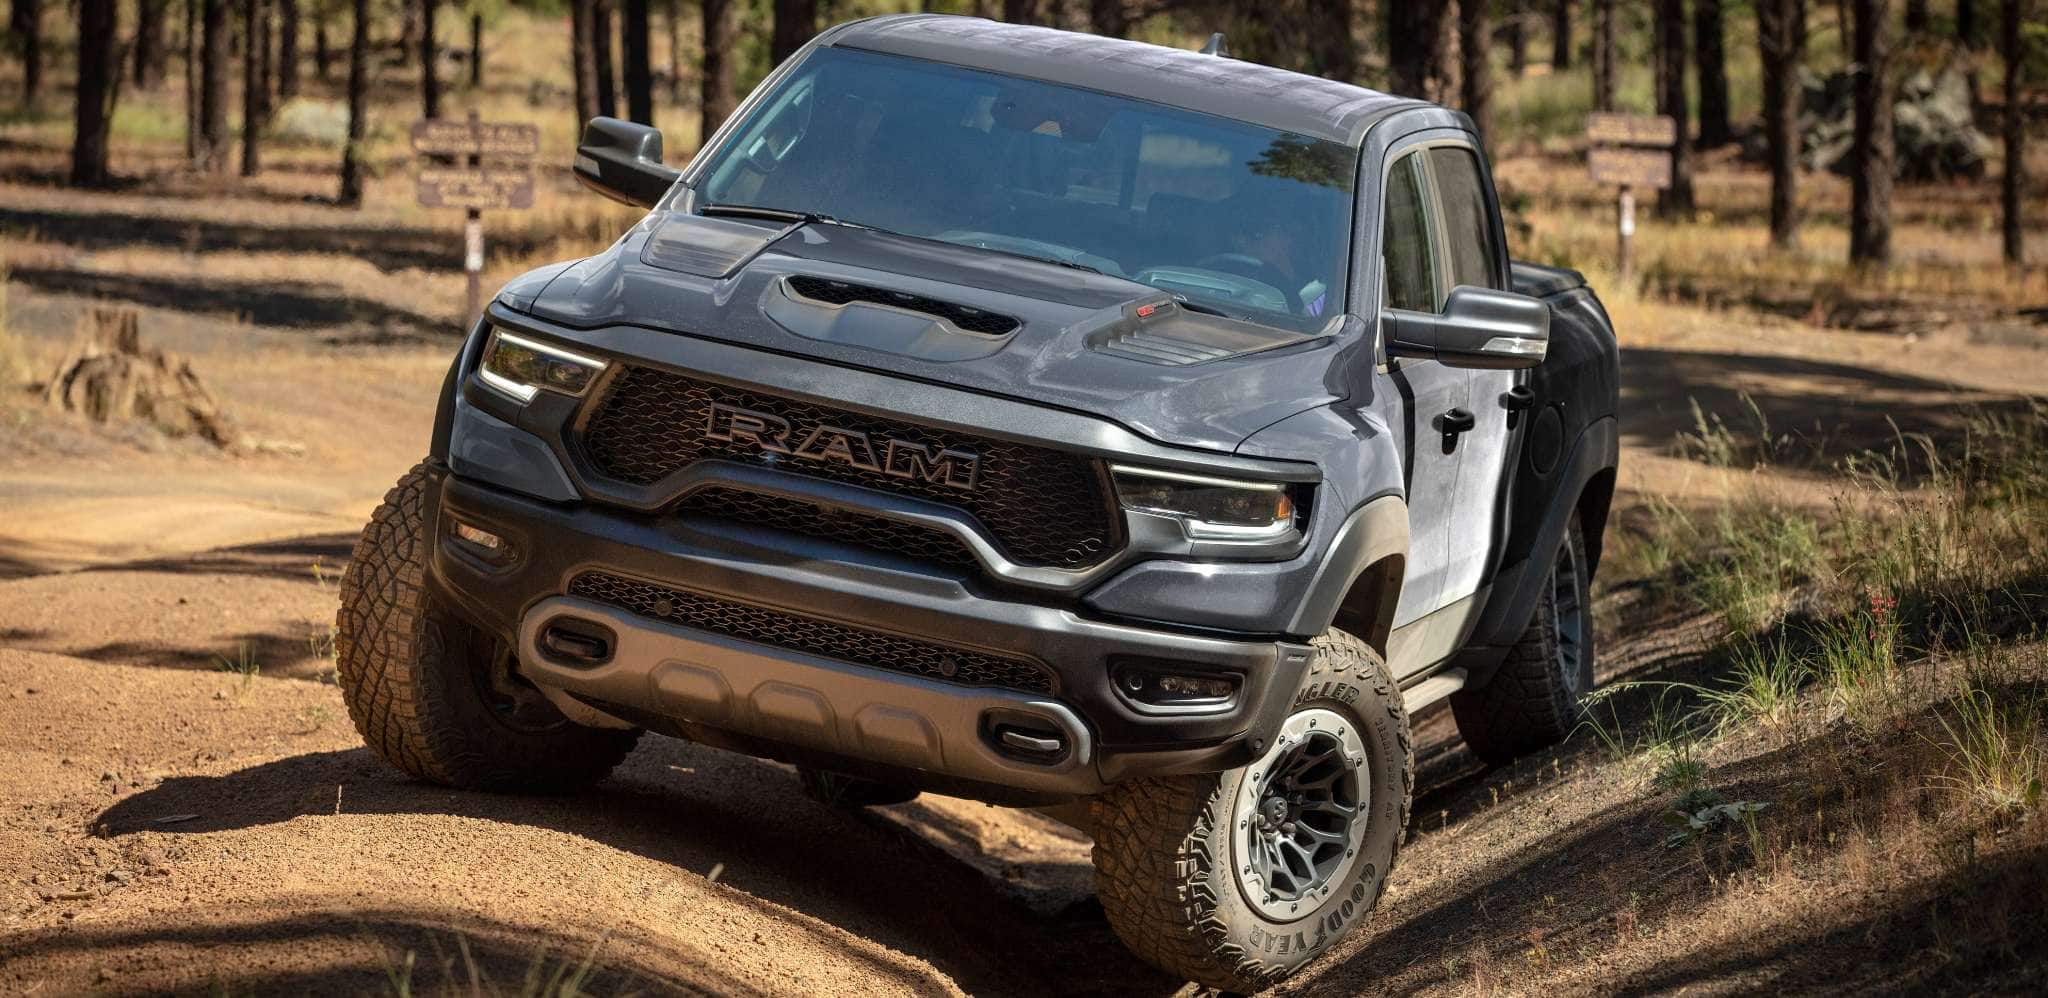 Display The 2024 Ram 1500 TRX Crew Cab being driven off-road on uneven terrain, with the front driver-side wheel in a shallow ditch and the other wheels elevated.